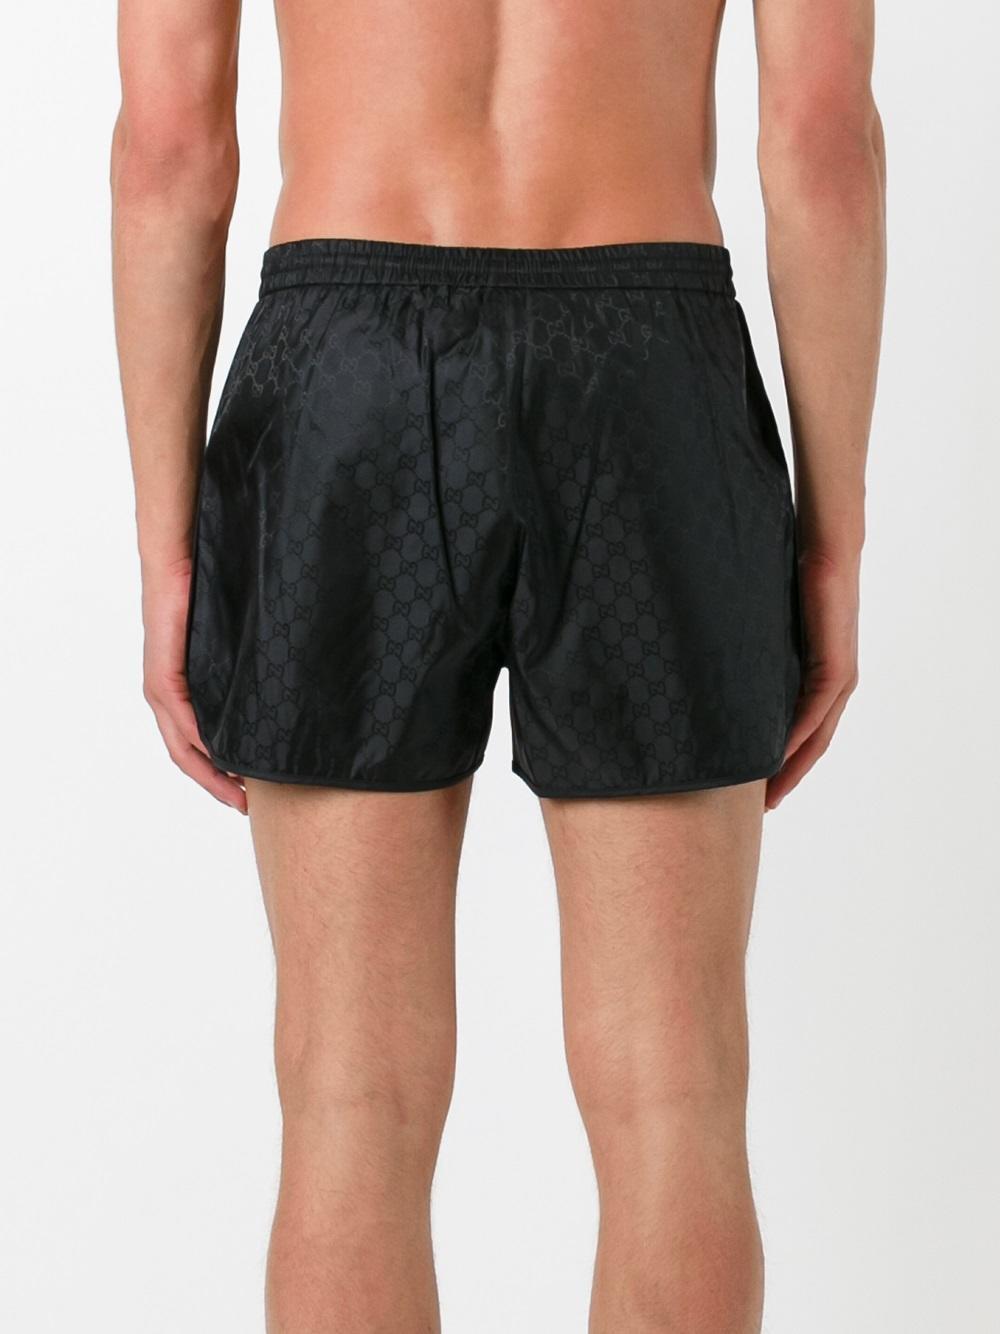 Gucci Synthetic Gg Swim Shorts in Black for Men - Lyst